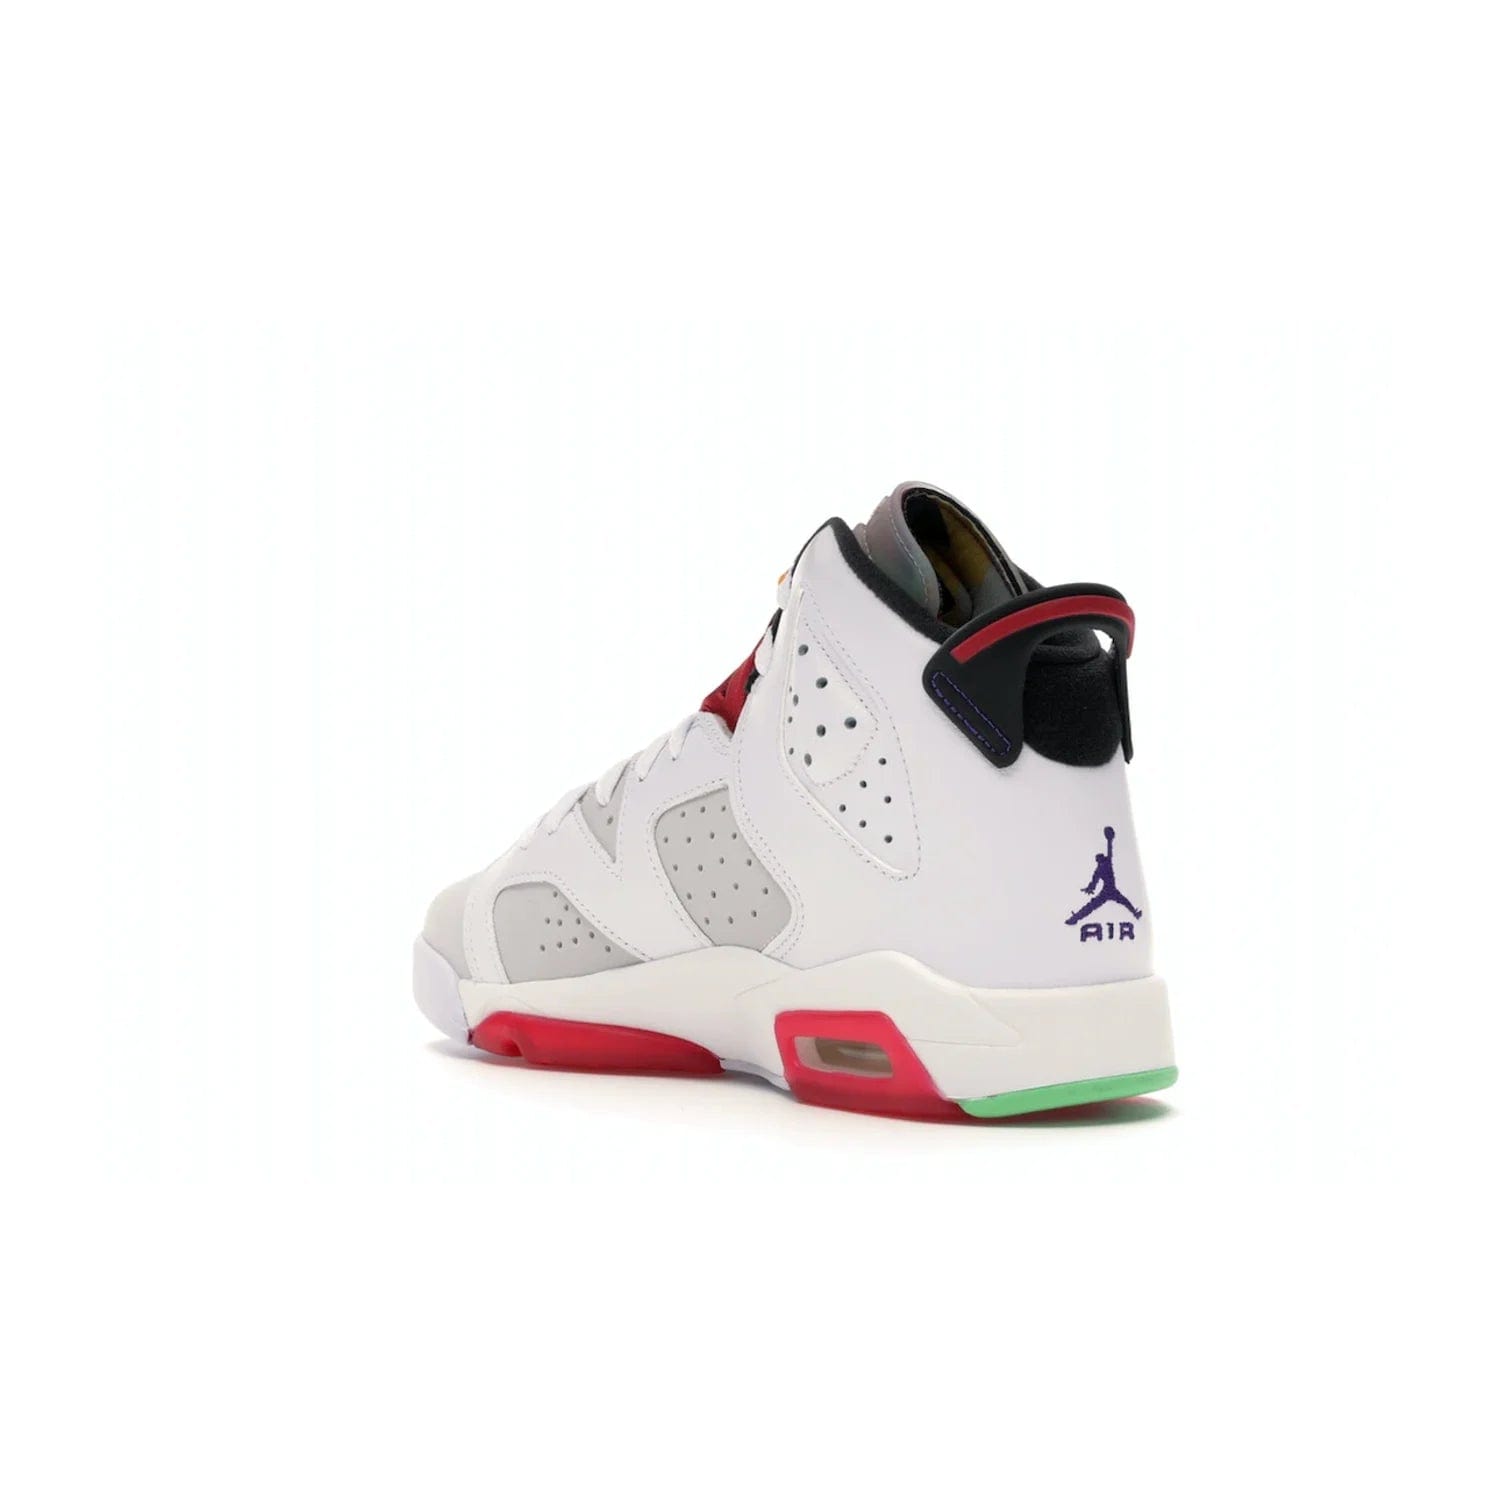 Jordan 6 Retro Hare (GS) - Image 24 - Only at www.BallersClubKickz.com - The Air Jordan 6 Hare GS. Comfortable suede upper, perforations, red pods, two-tone midsole, and signature "Jumpman" emblem. Released 17 June 2020. Perfect for any sneakerhead.